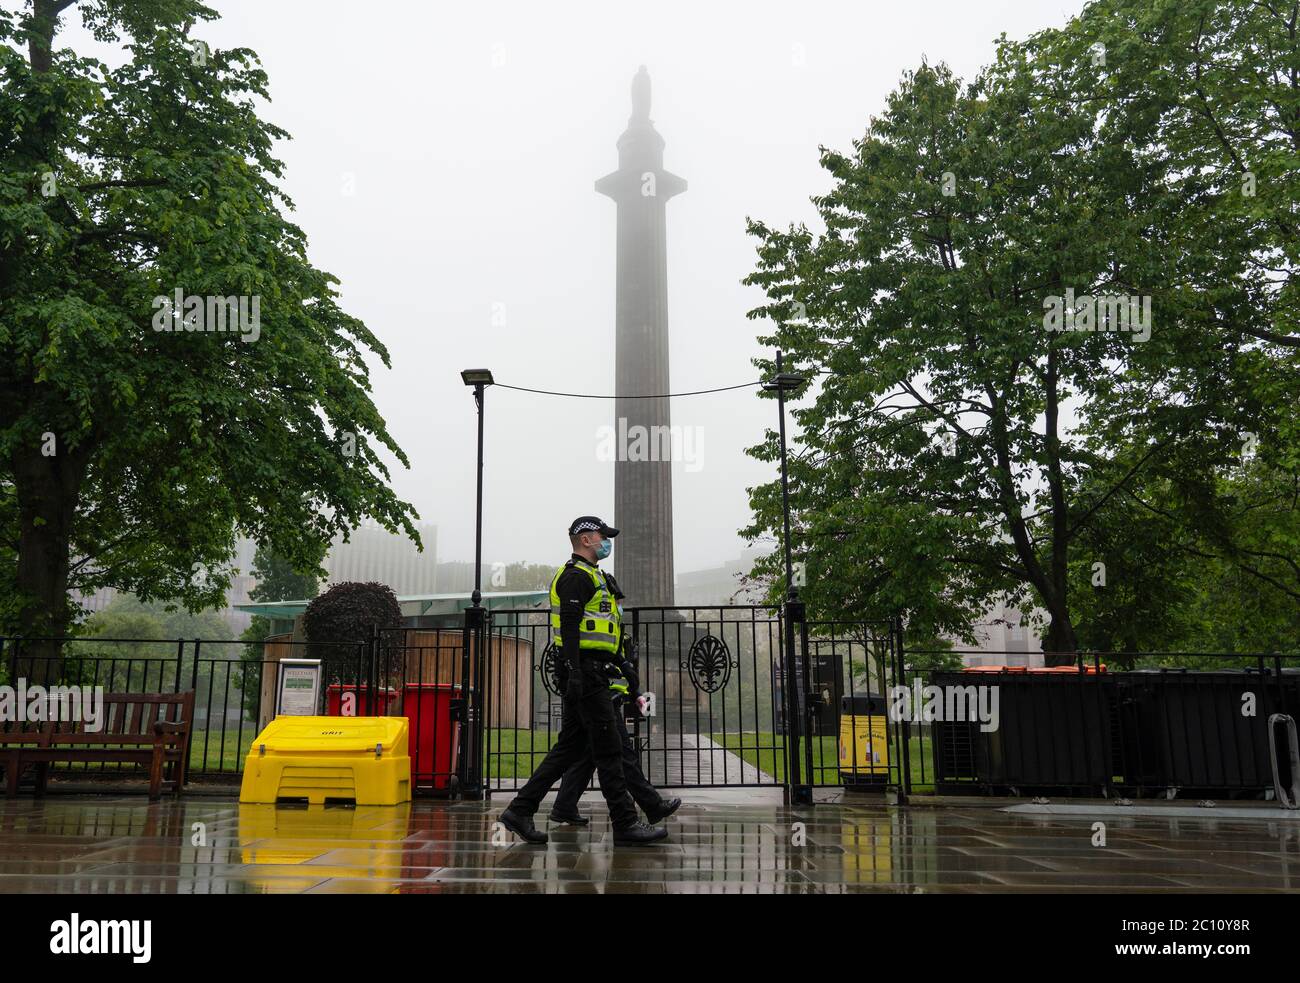 Edinburgh, Scotland, UK. 13 June 2020. Police patrol St Andrew Square on Saturday afternoon. A planned Black Lives Matter demonstration in the square seems to have attracted only a few peaceful protestors. The square is the site of the Melville Monument and statue of Henry Dundas, Protestors want the statue removed. Iain Masterton/Alamy Live News Stock Photo